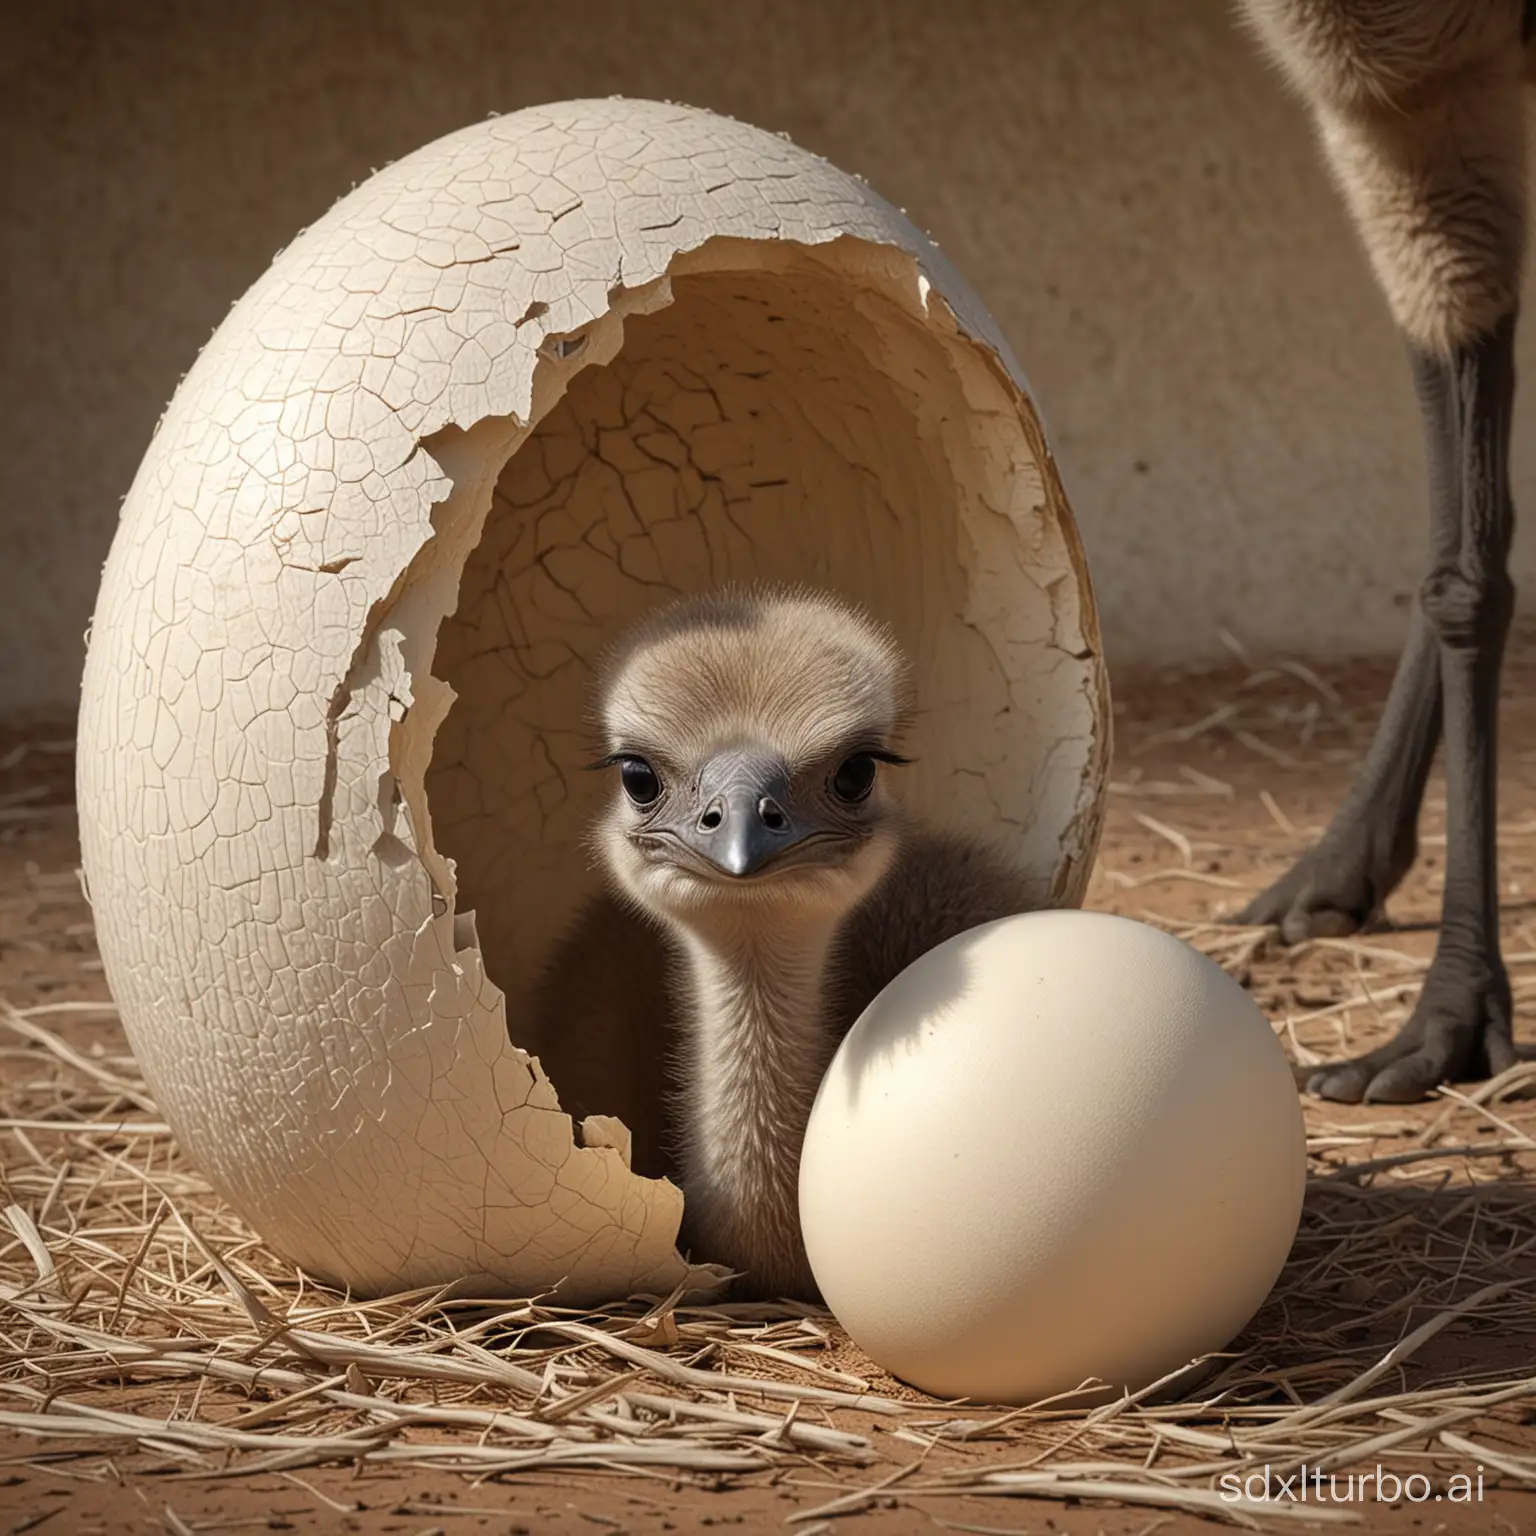 An ostrich egg cracks, and a newborn ostrich cub peeks out of it, there is a hot savannah around, dynamics, photorealism style